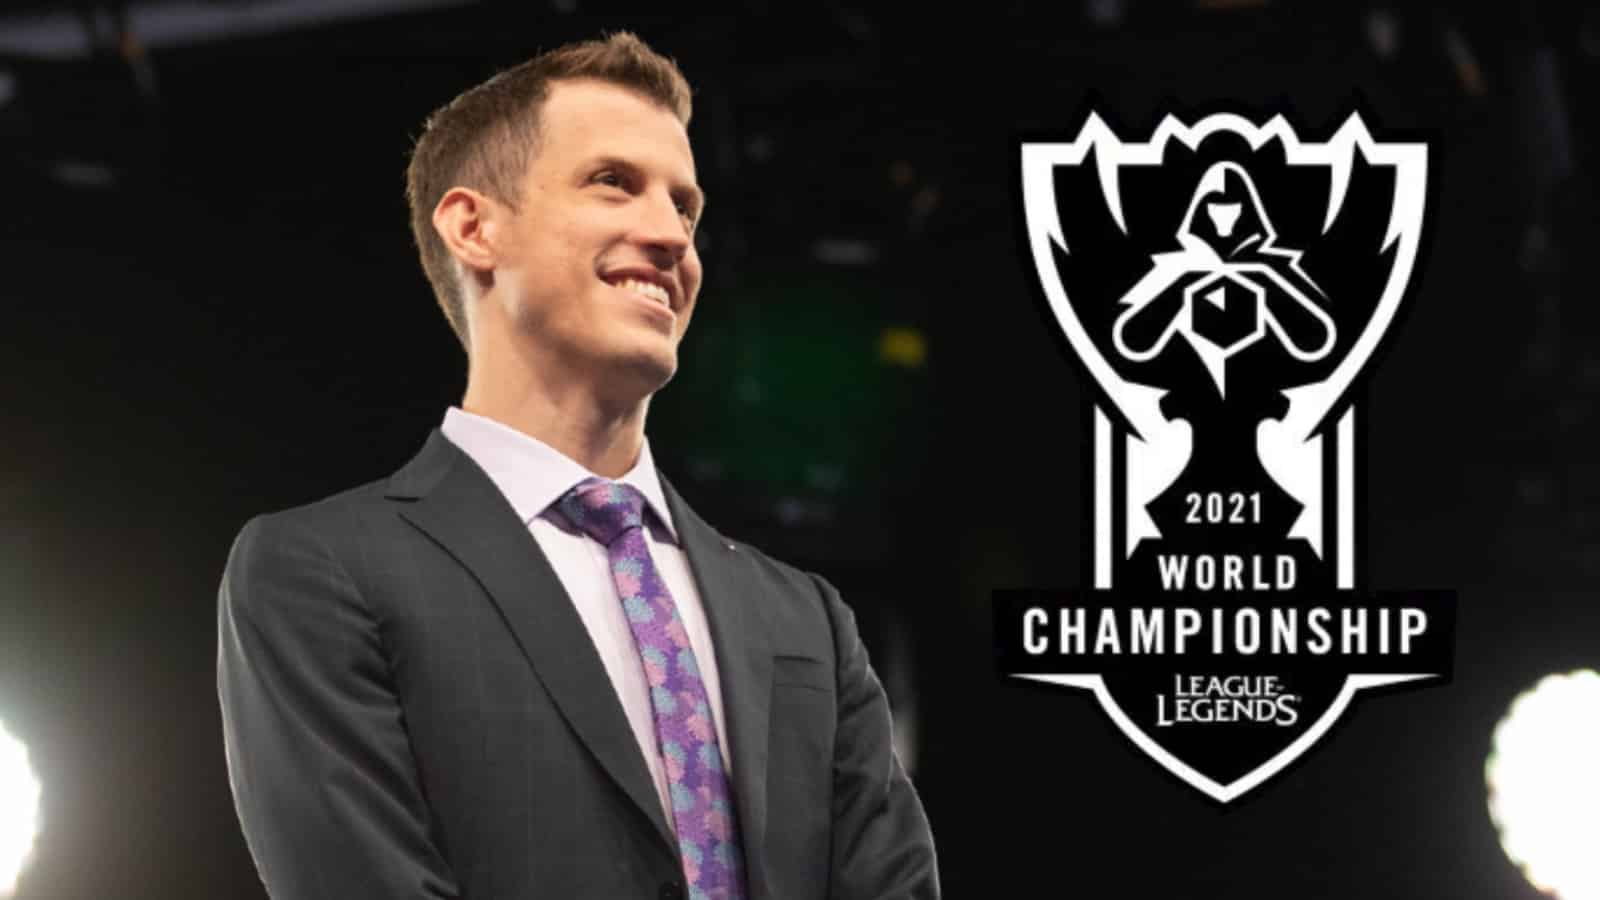 League caster CaptainFlowers steps down from Worlds 2021 broadcast